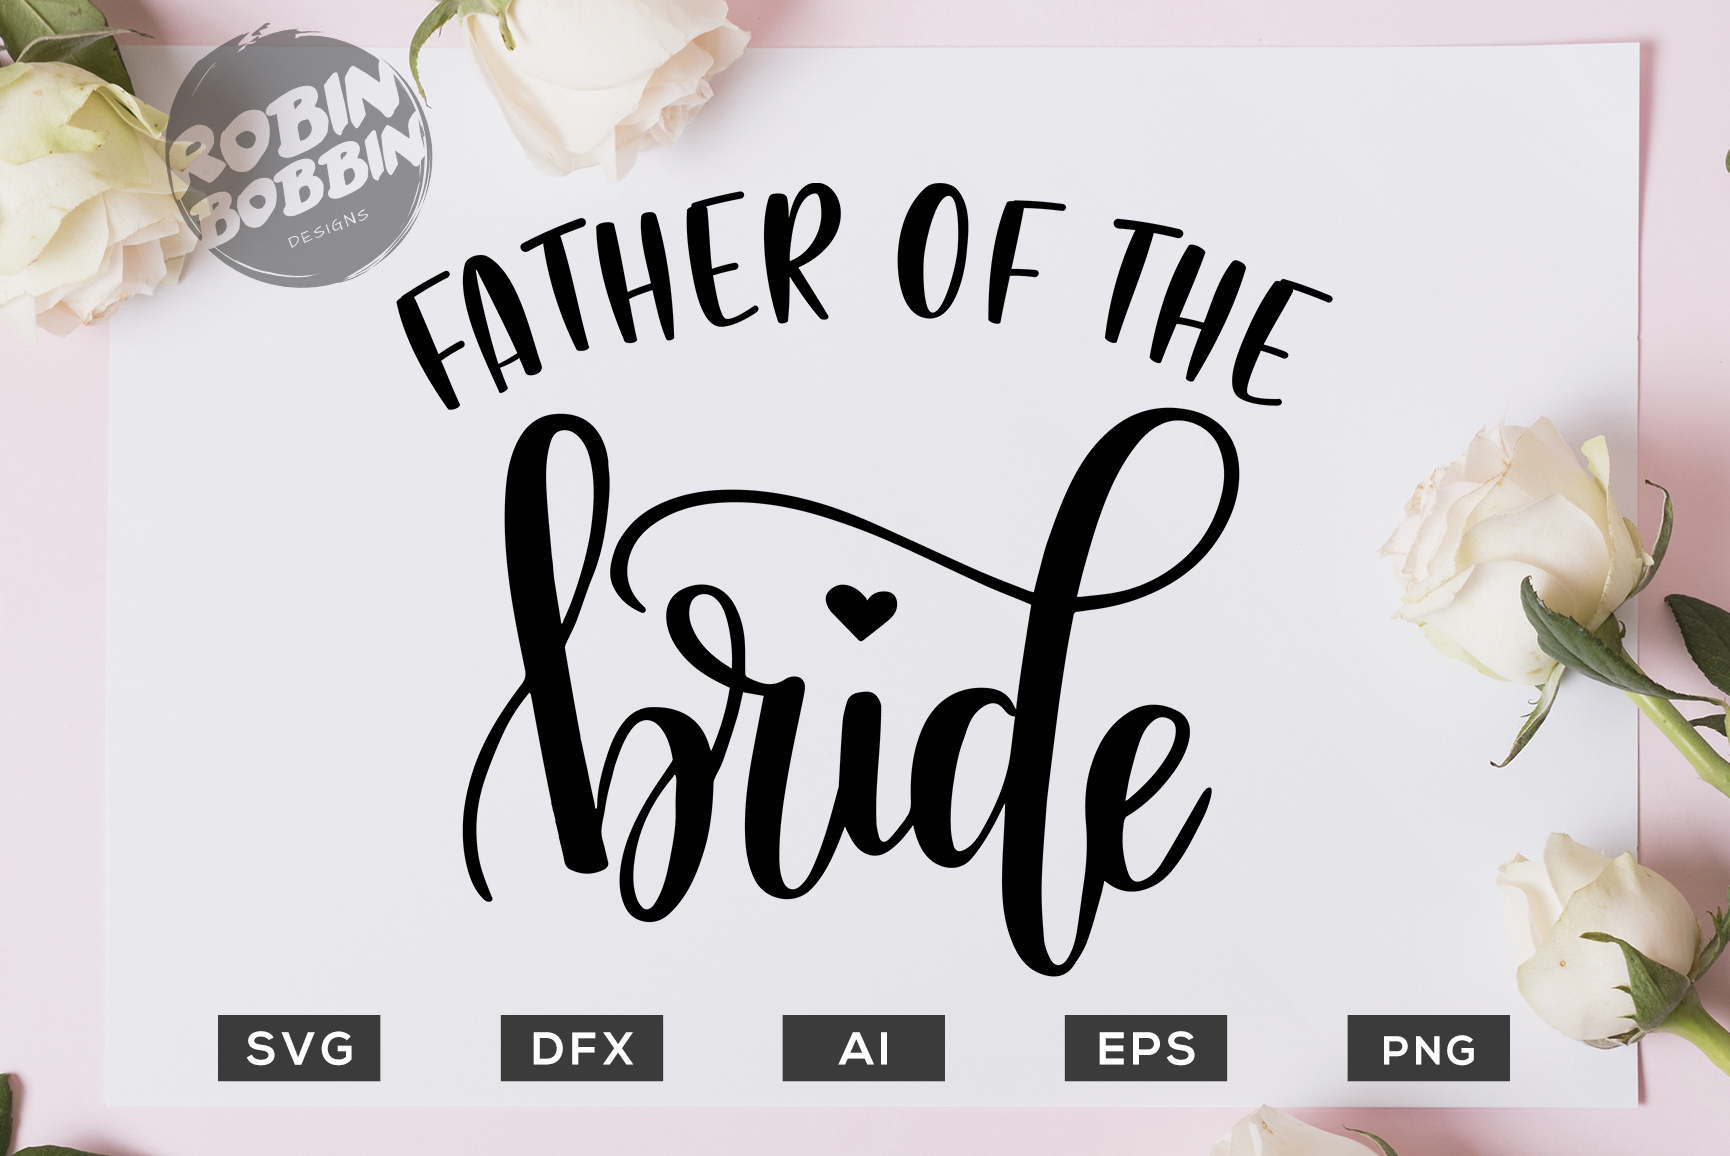 Download Father of the Bride SVG File - Wedding SVG PNG EPS Files